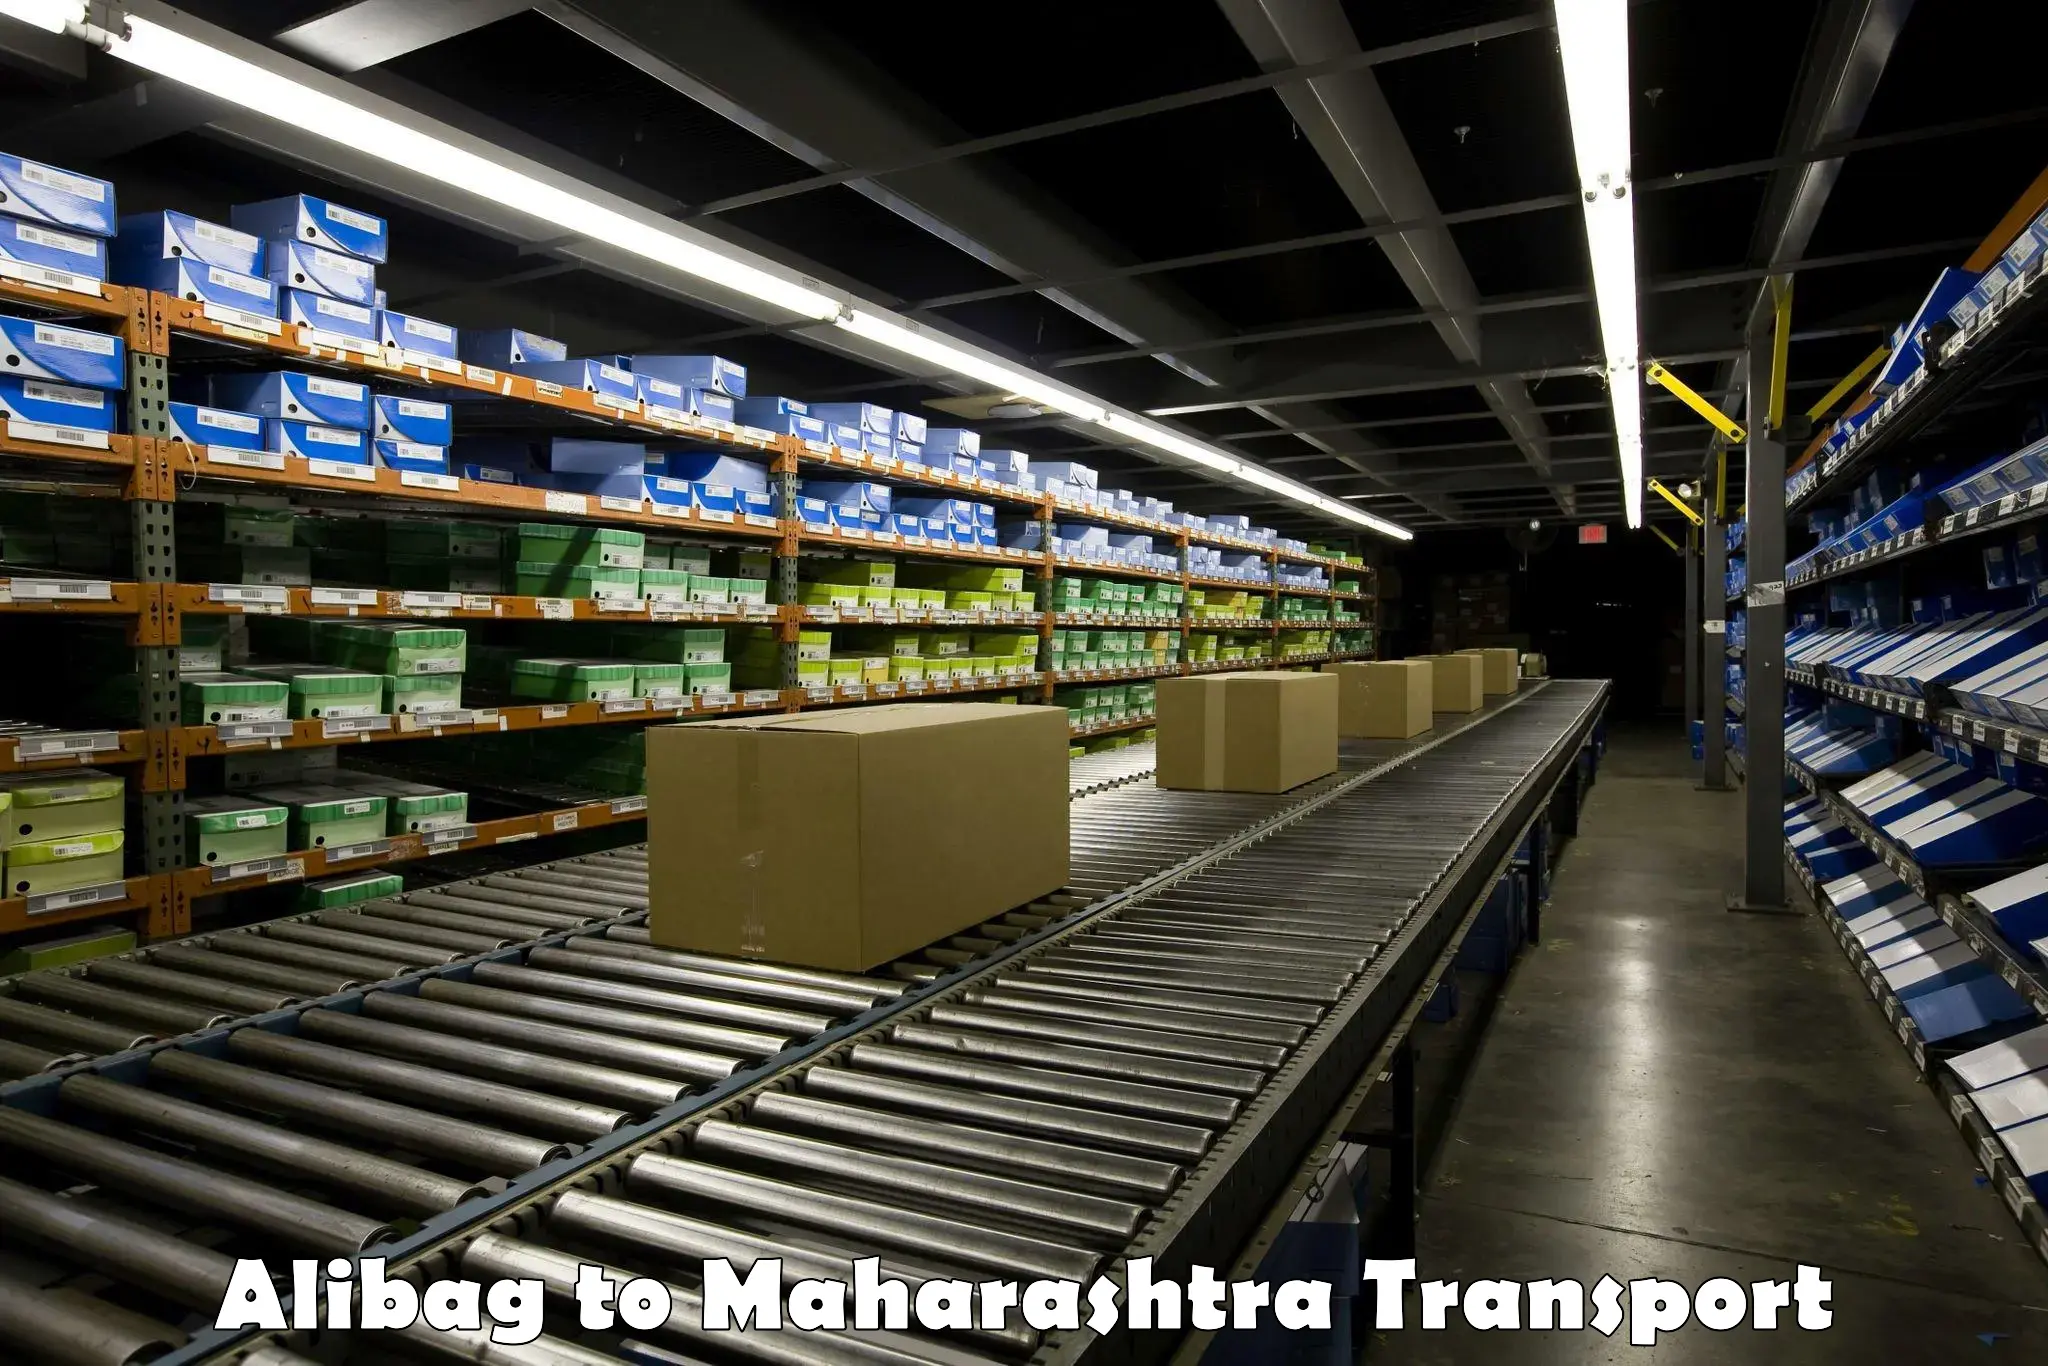 Road transport online services Alibag to Thane